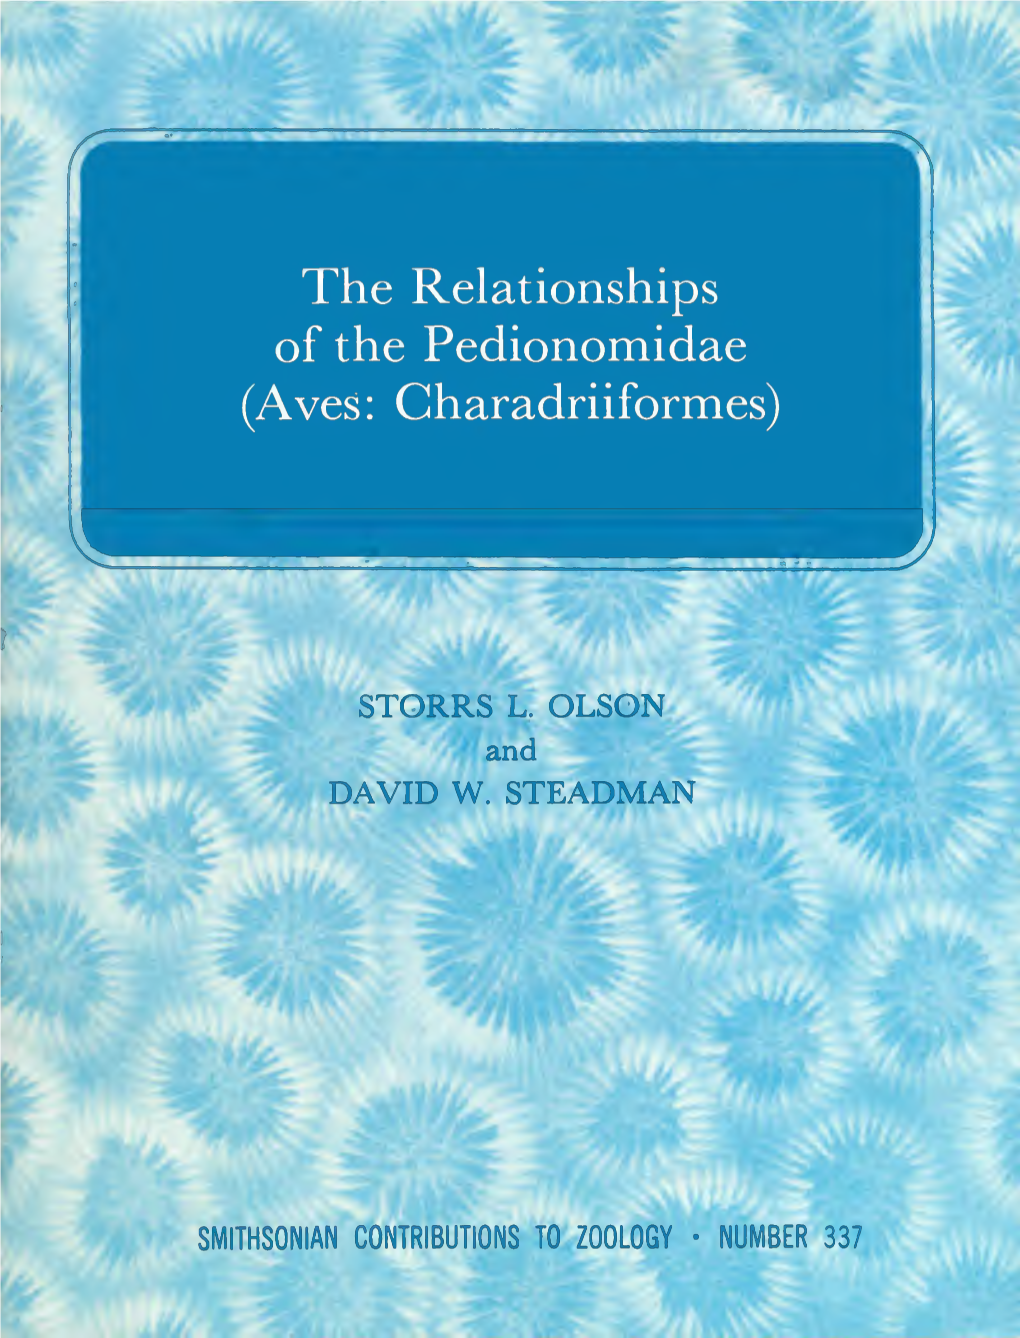 The Relationships of the Pedionomidae (Aves: Charadriiformes)